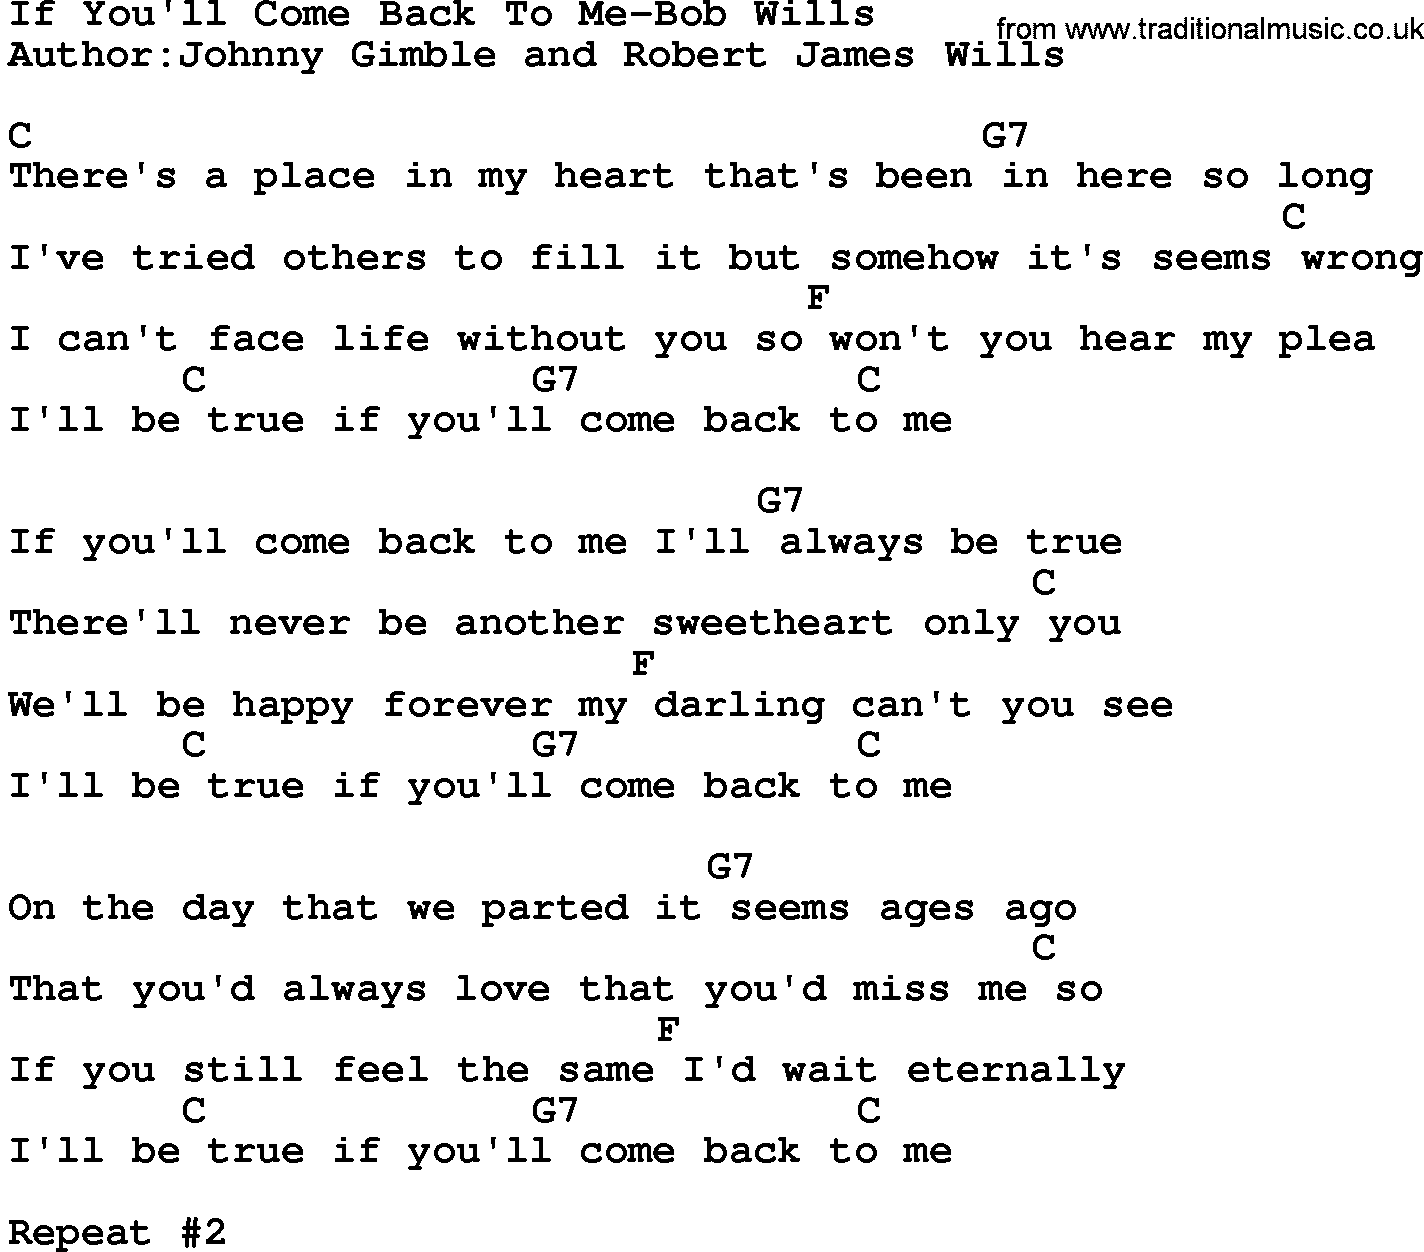 Country music song: If You'll Come Back To Me-Bob Wills lyrics and chords